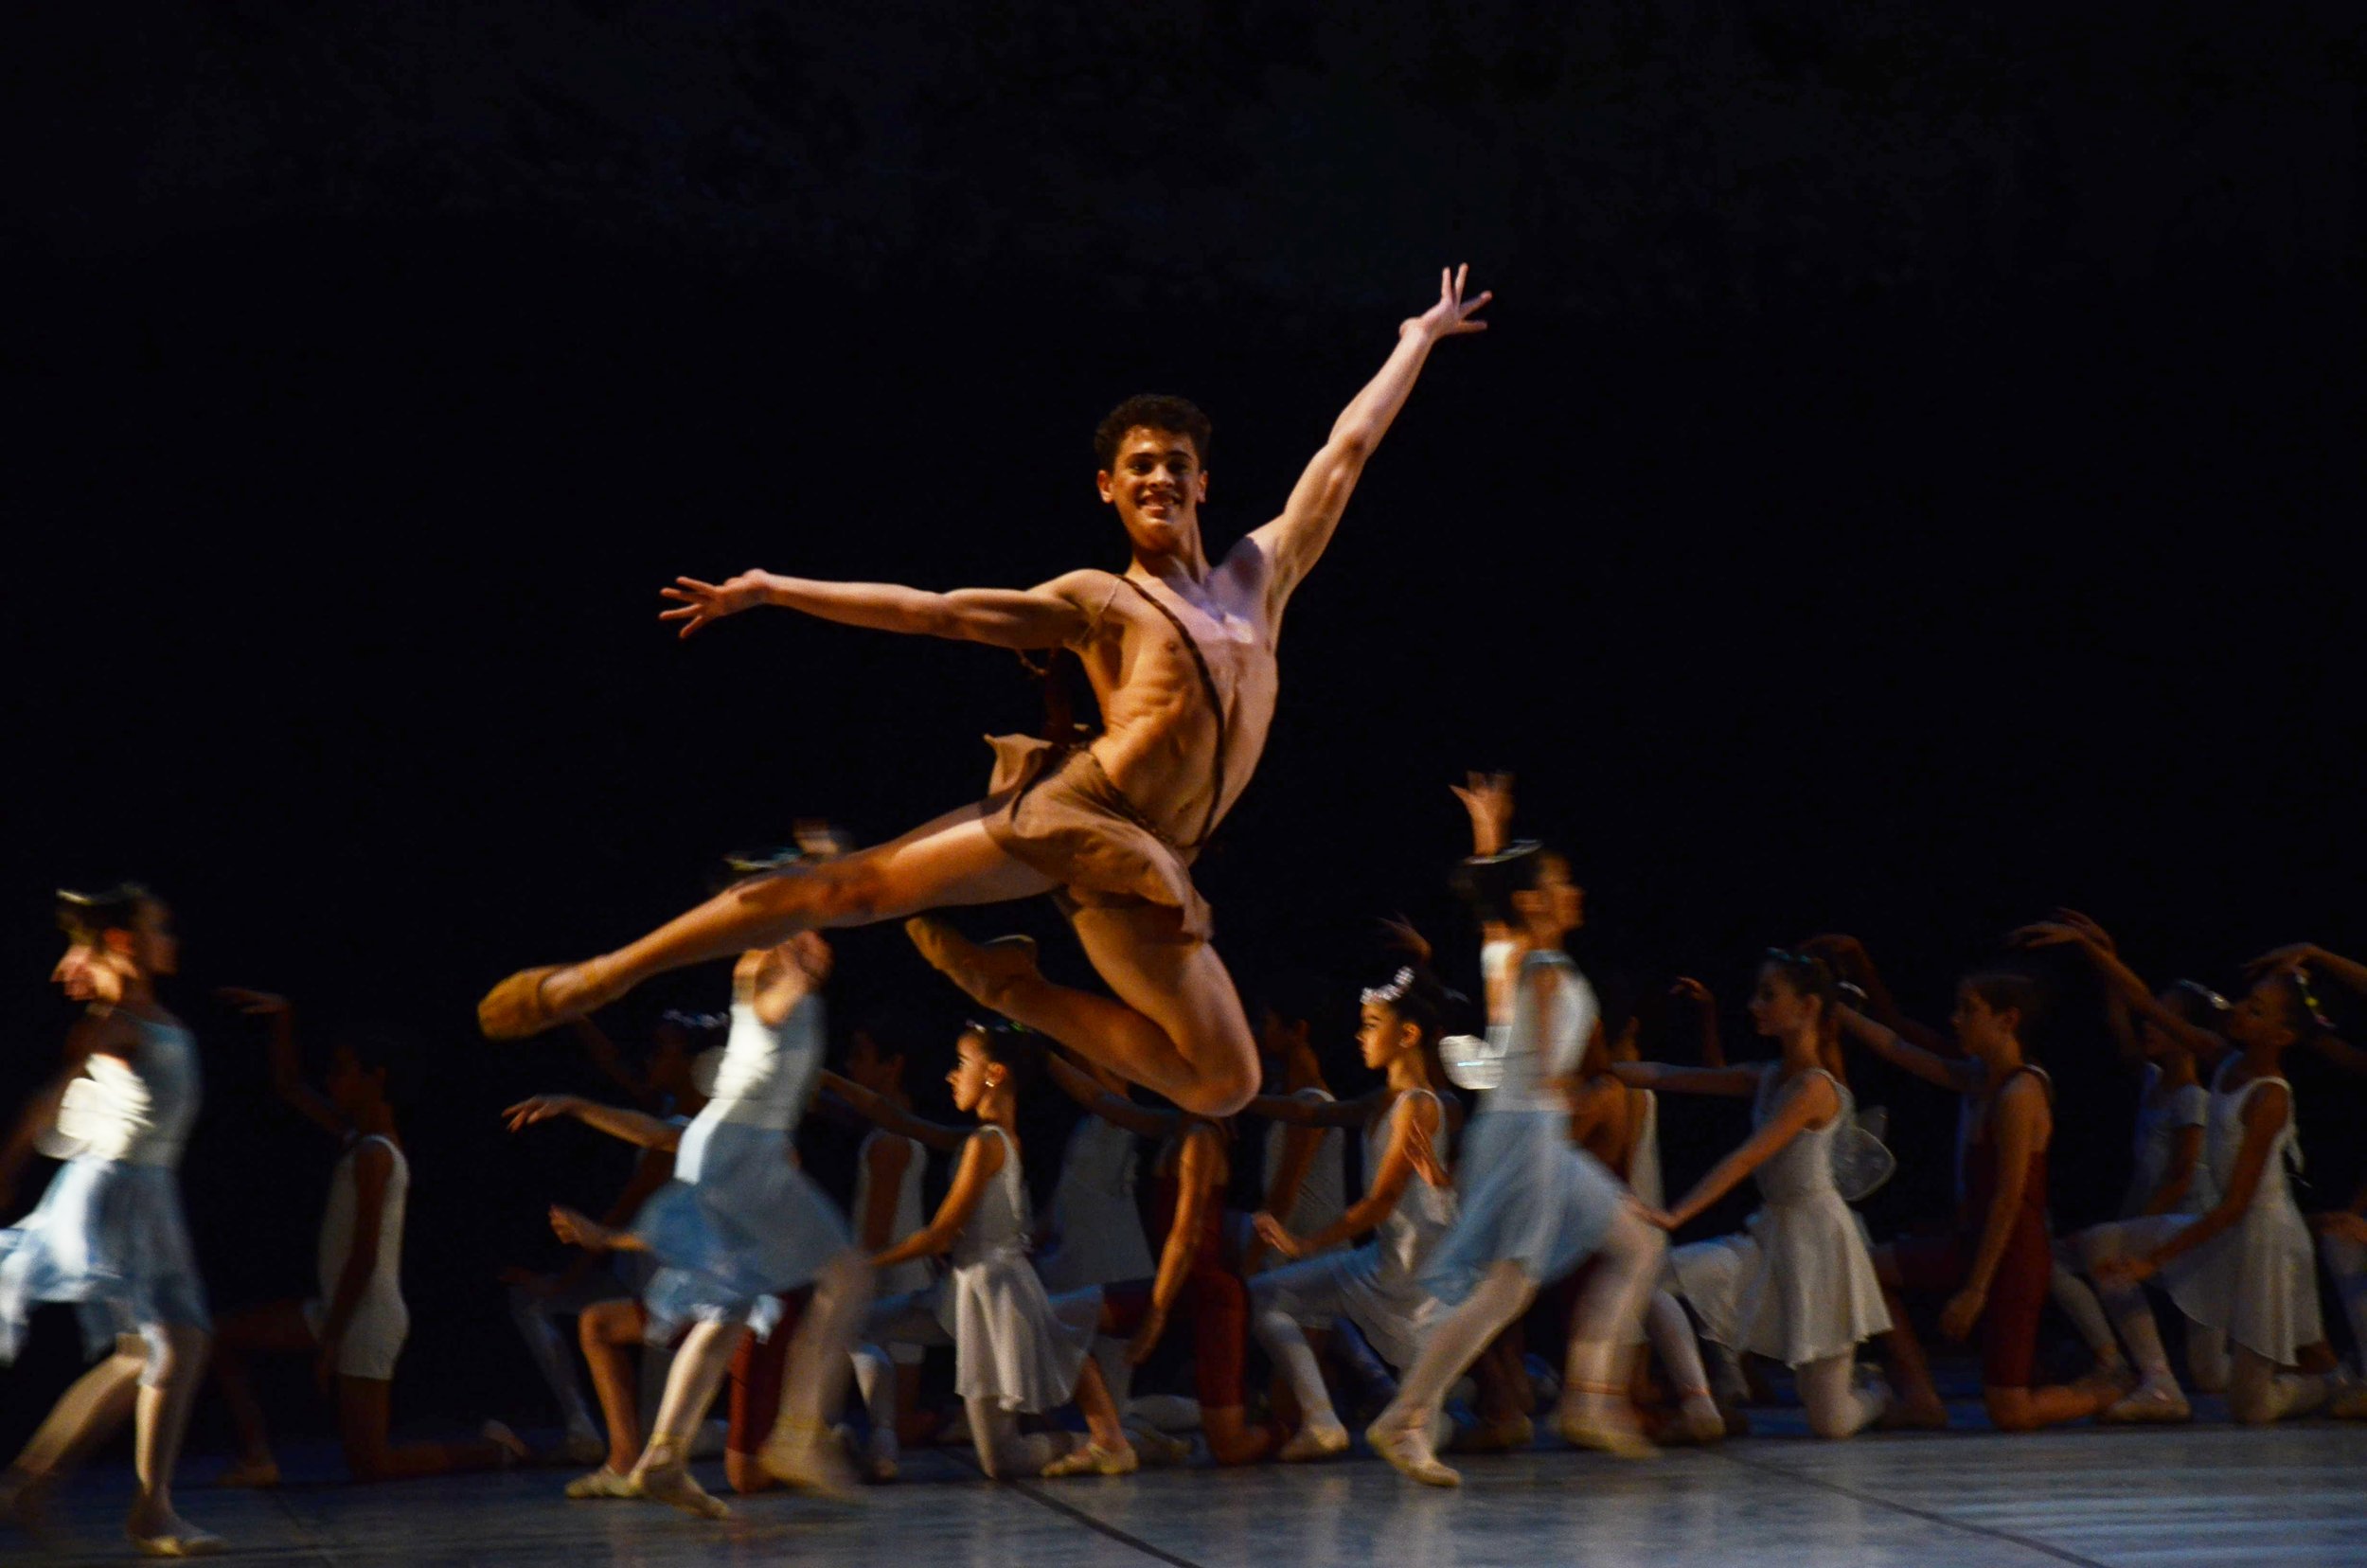 Alexis and his fellow students of the National Ballet School of Cuba 16 © Indyca.JPG